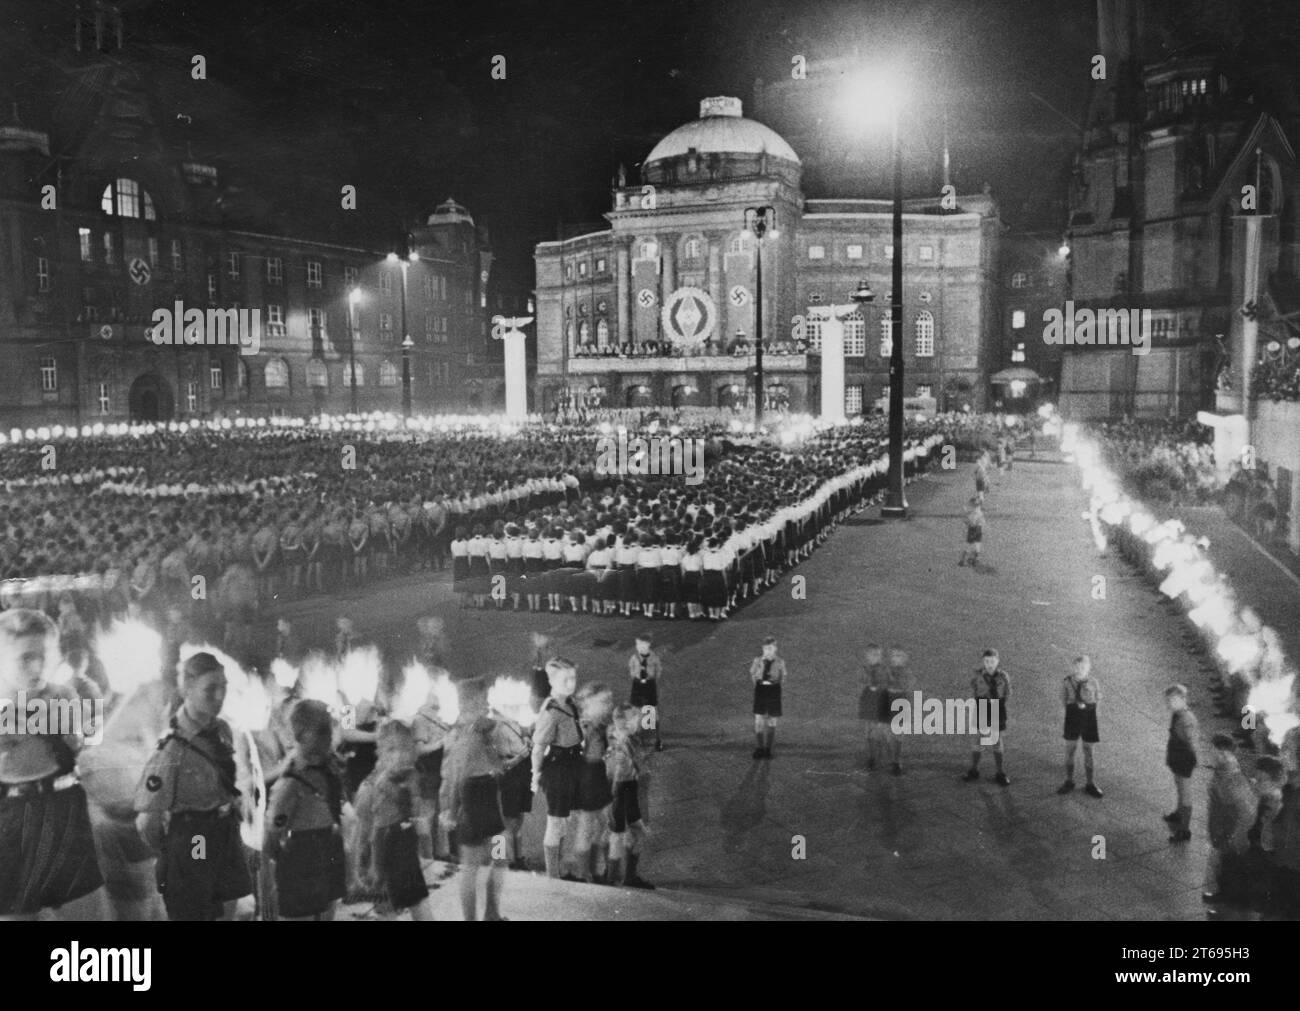 Members of the Hitler Youth and the Bund Deutscher Mädel at the evening ceremony marking the opening of the German Youth Championships on Adolf Hitler Square. Photo: Schulze [automated translation] Stock Photo